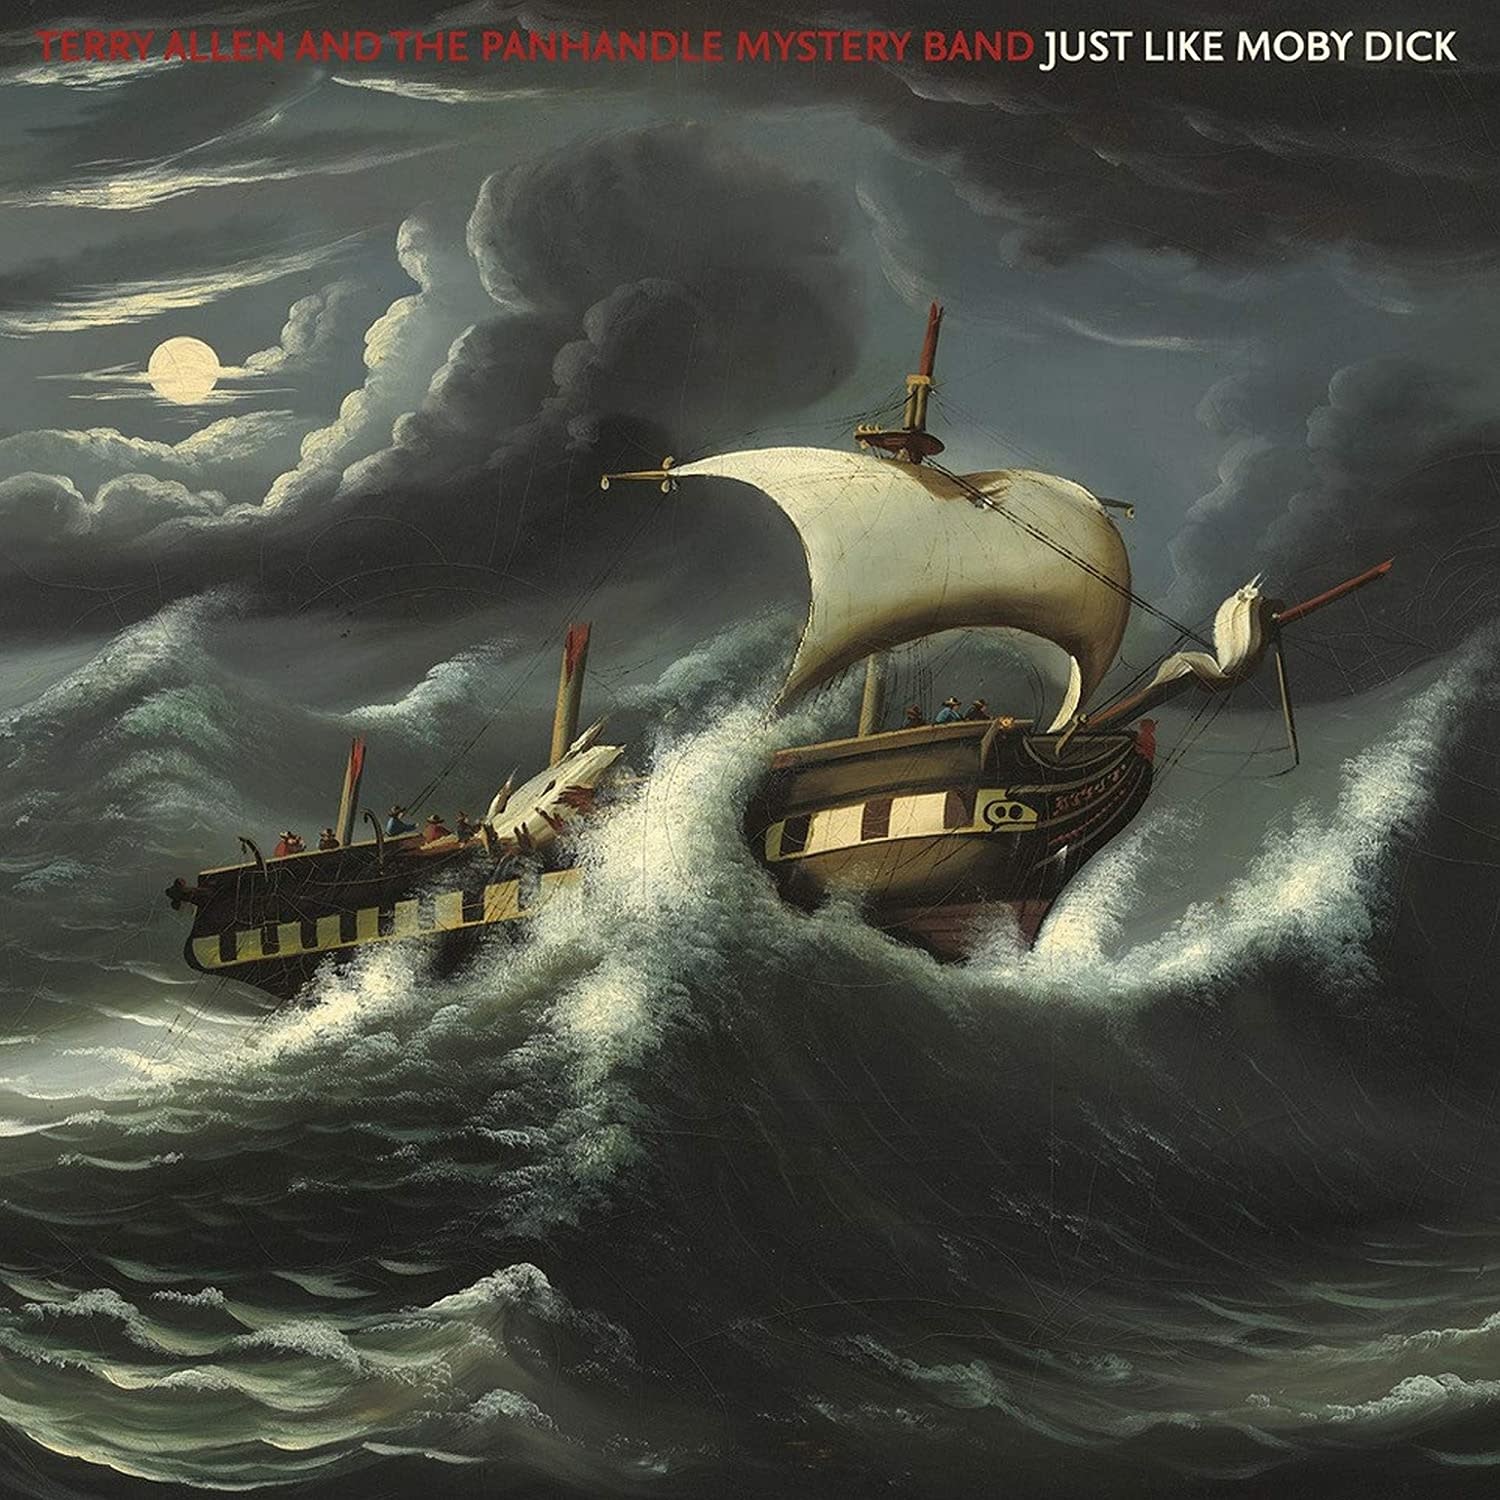 Terry Allen & The Panhandle Mystery Band – Just Like Moby Dick